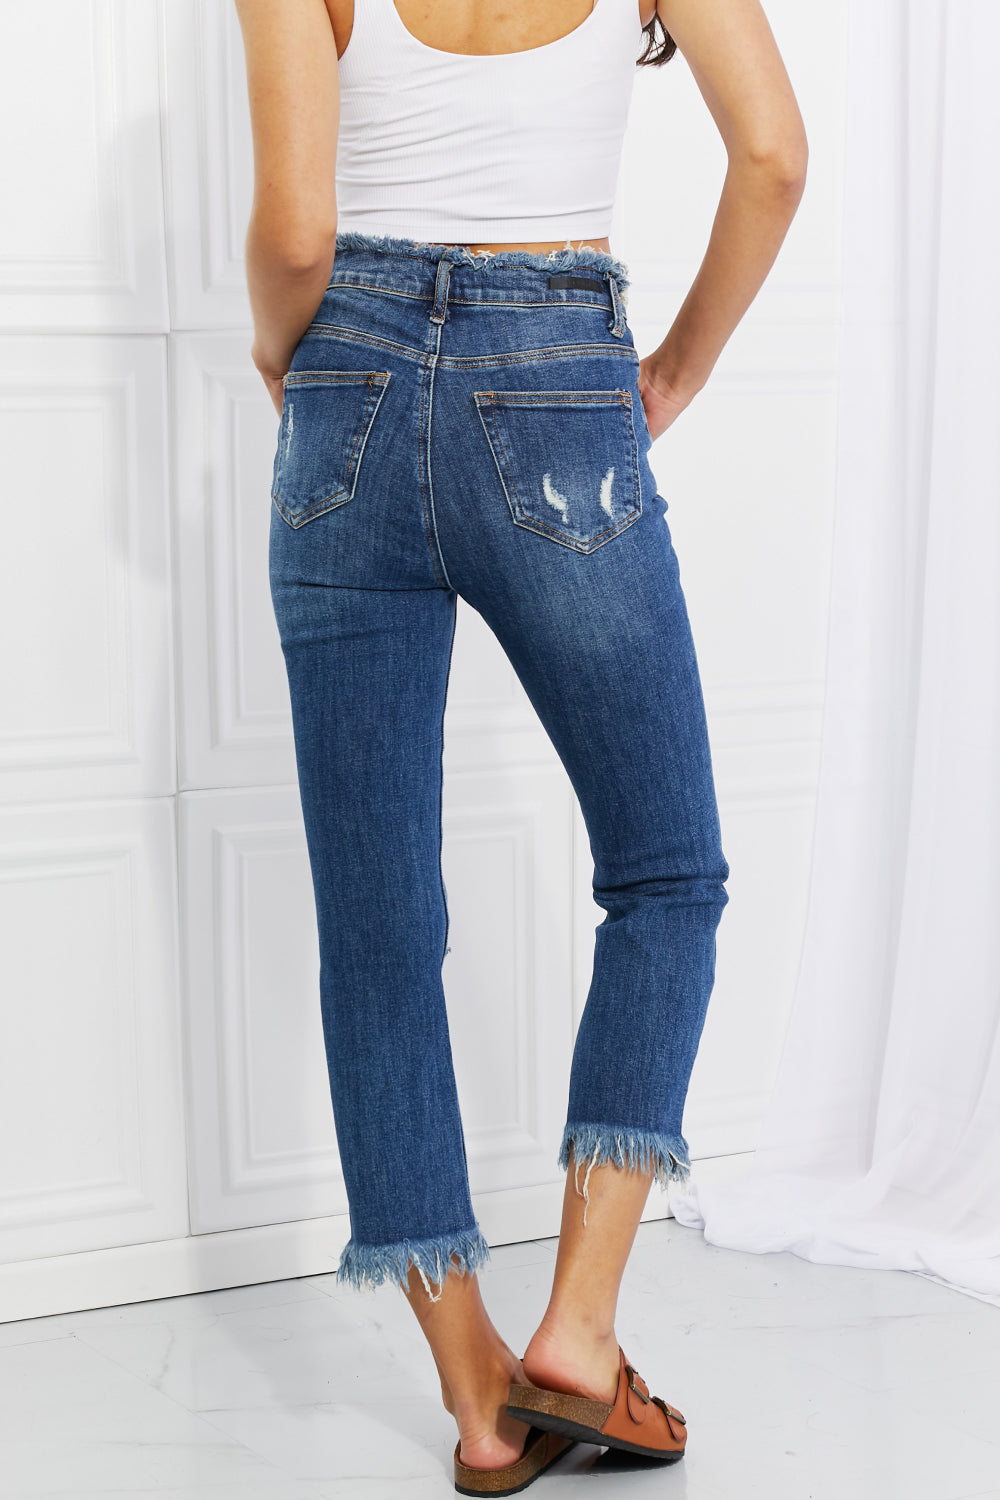 Chic Straight Leg Jeans' highlighting a pair of jeans with a stylish straight leg cut, perfect for a fashionable and versatile wardrobe staple.